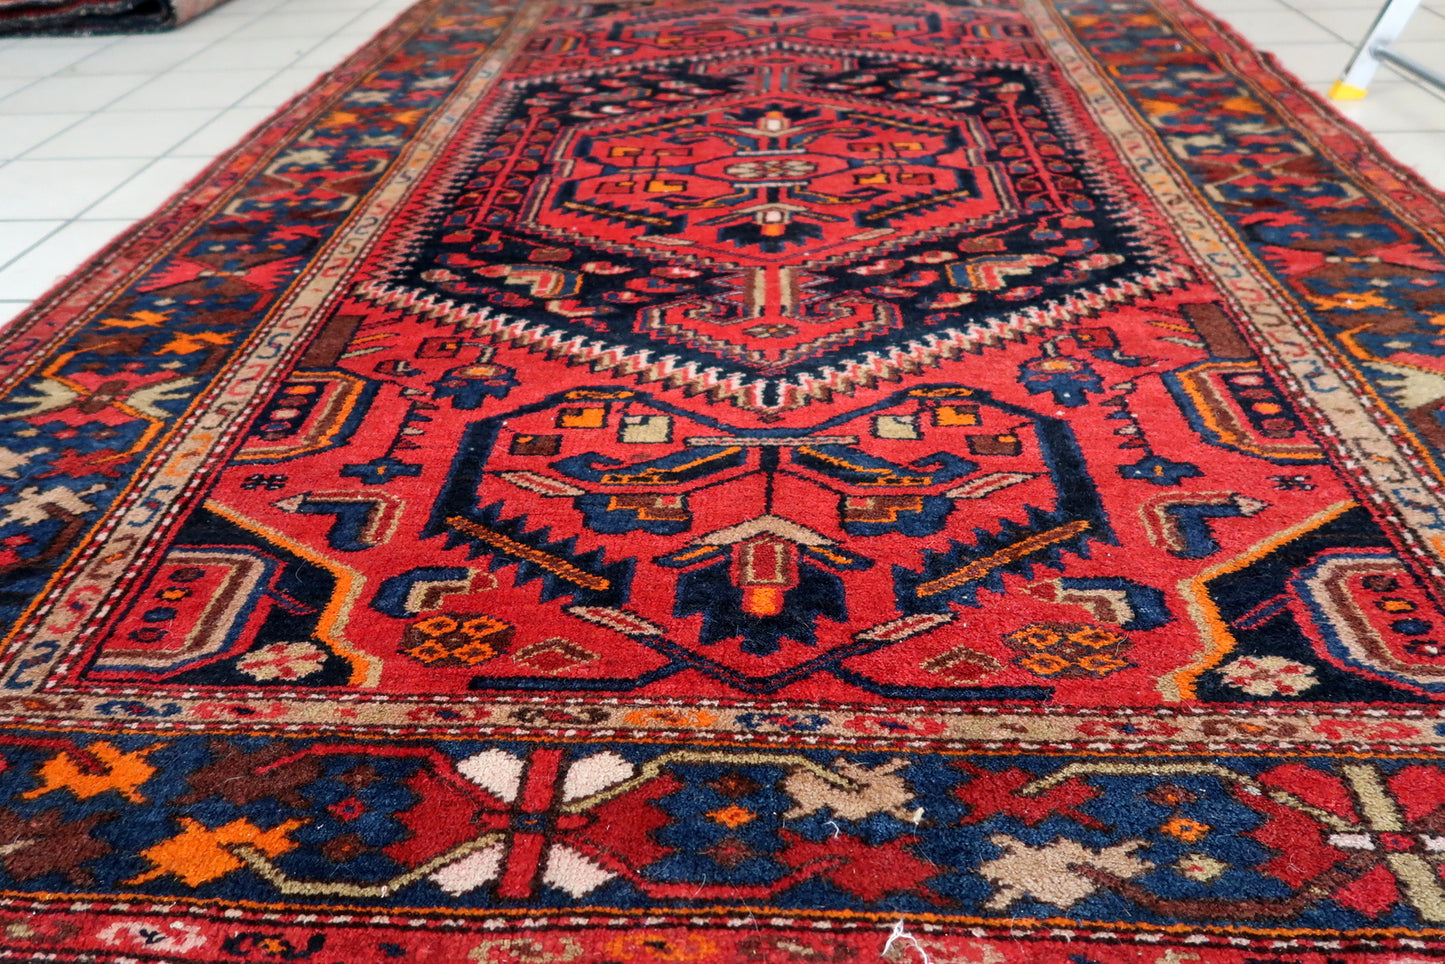 Antique Rug with Persian Artistry - Timeless Aesthetic